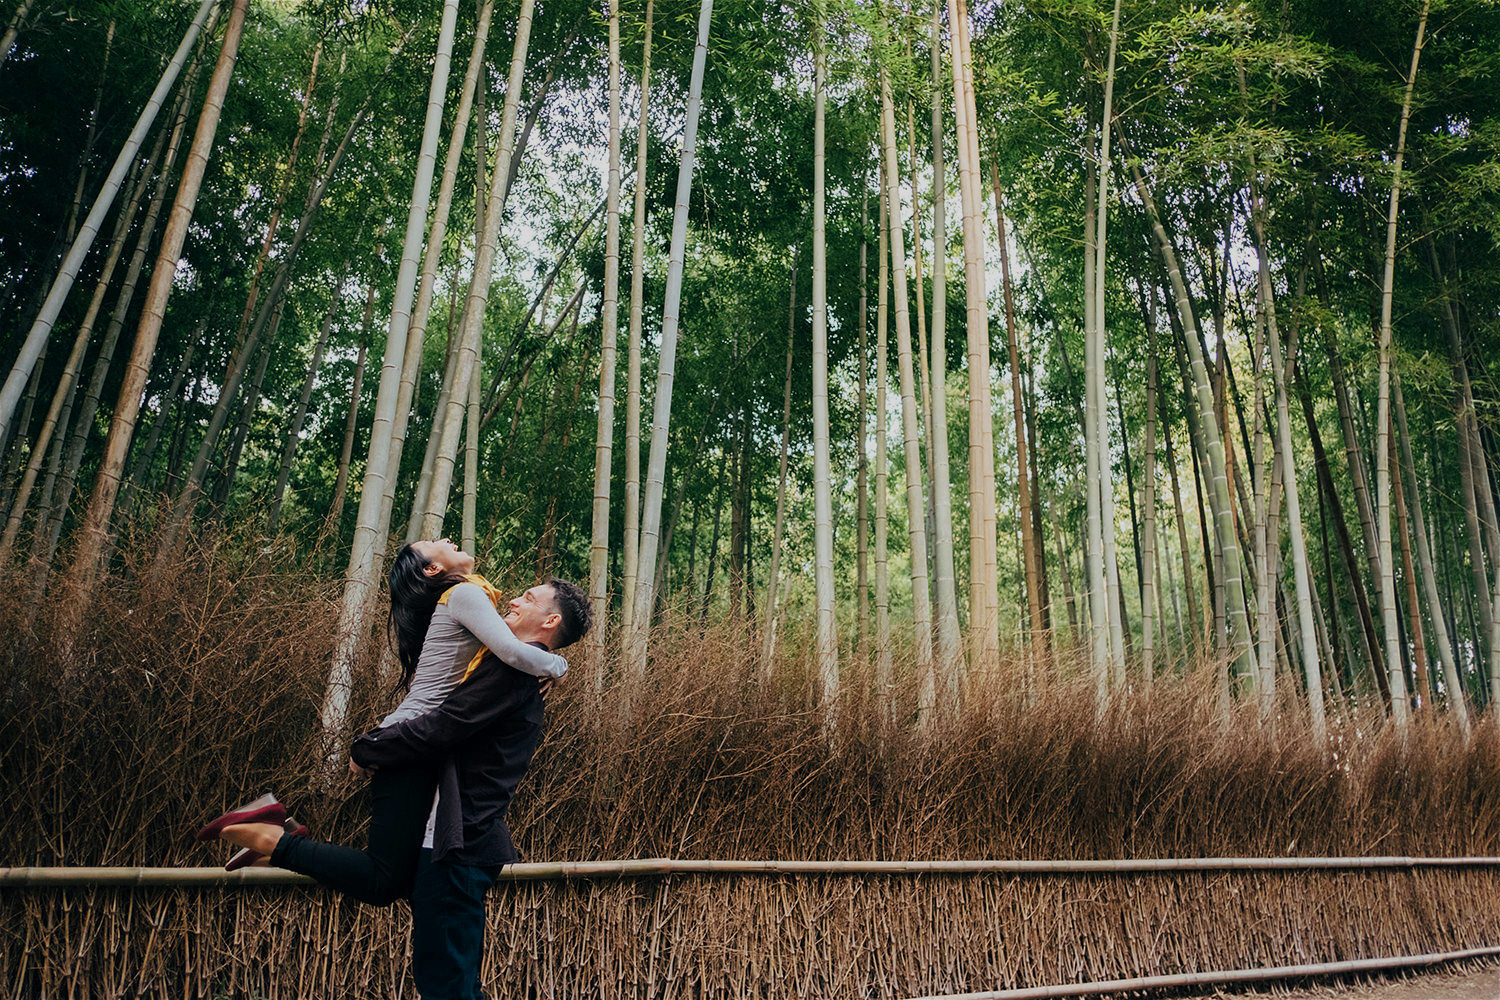 husband-holding-wife-high-in-bamboo-forest-kyoto.jpg